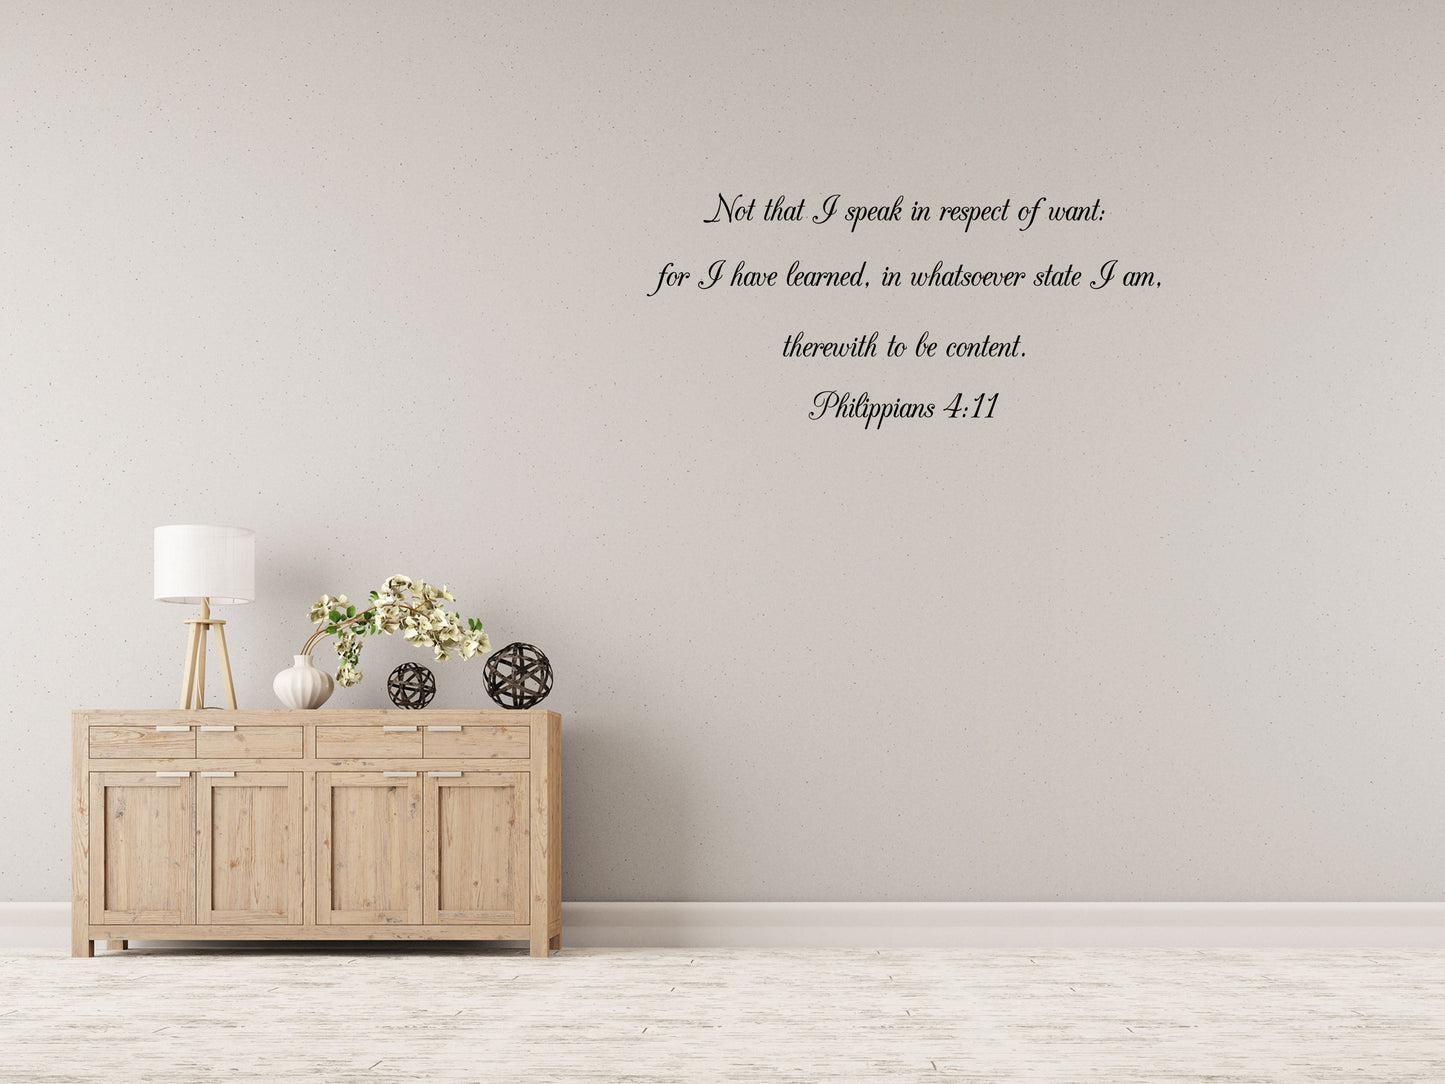 Philippians 4:11 - Scripture Wall Decals - Decal Wall Stickers Vinyl Wall Decal Inspirational Wall Signs 